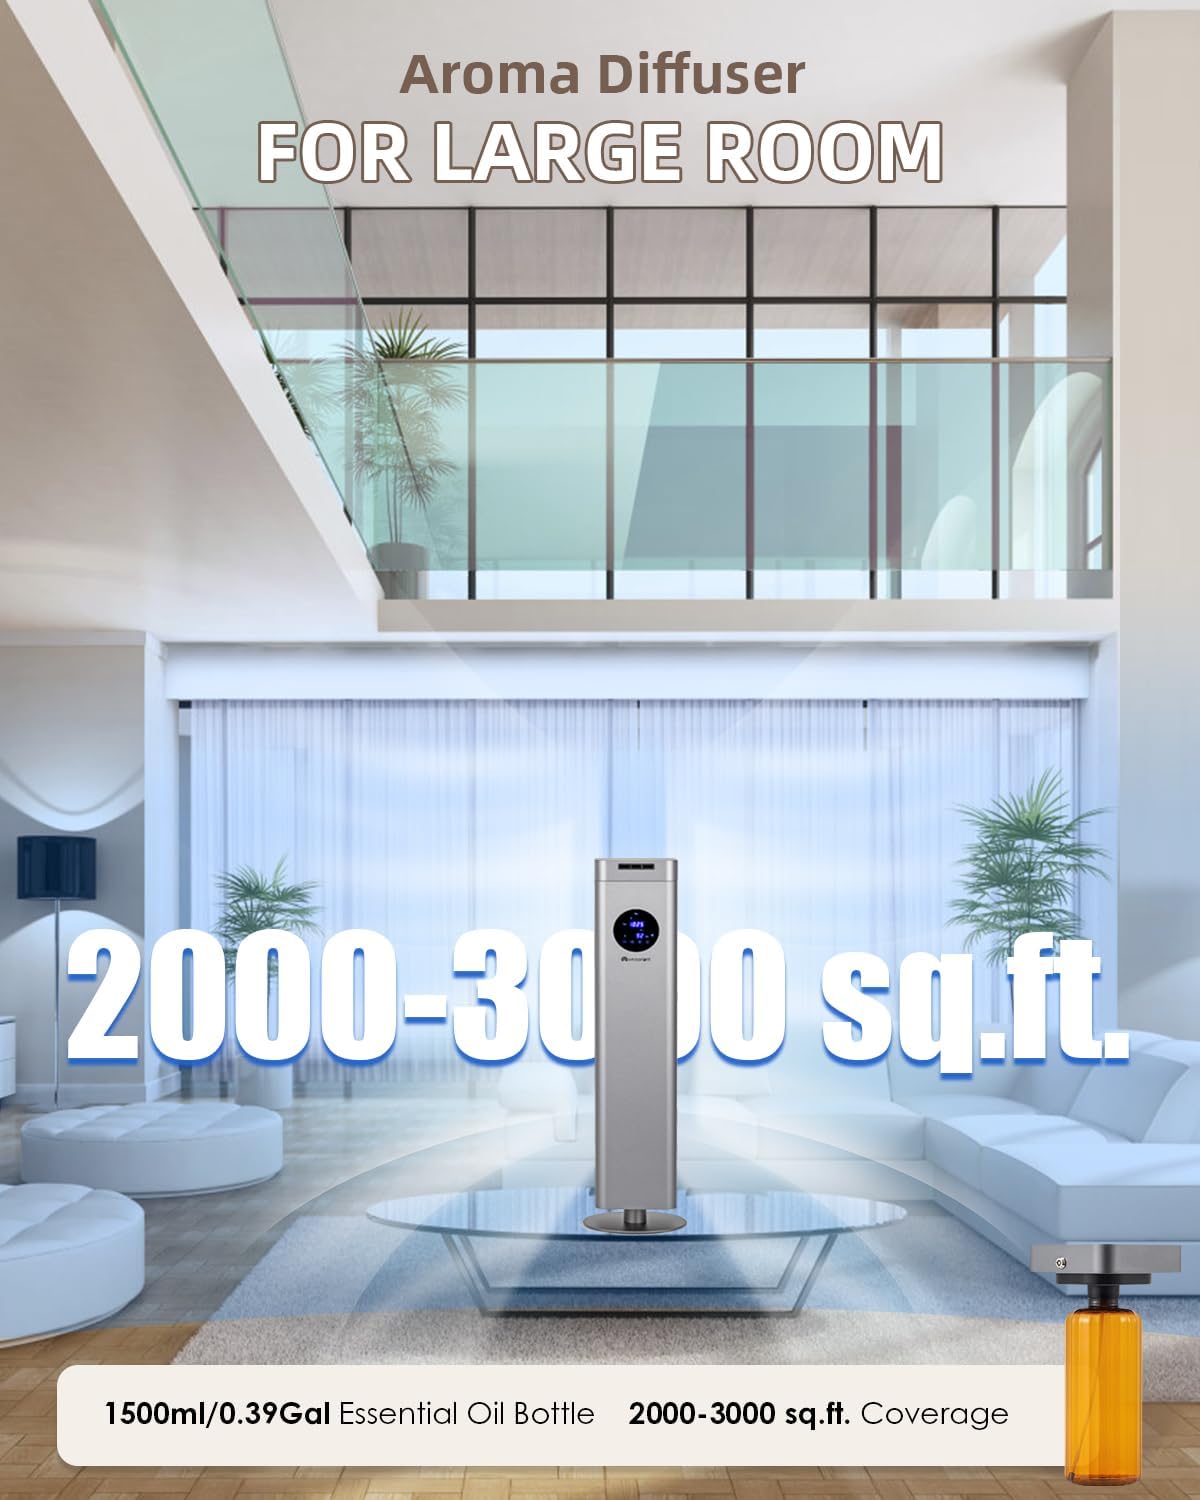 Mxmoonant Scent Air Machine 1500ml, Standing Floor Waterless Diffuser with Smart Control, 2000-3000sq.ft Coverage Cold Air Nebulizing Diffusion System for Living Room, Office